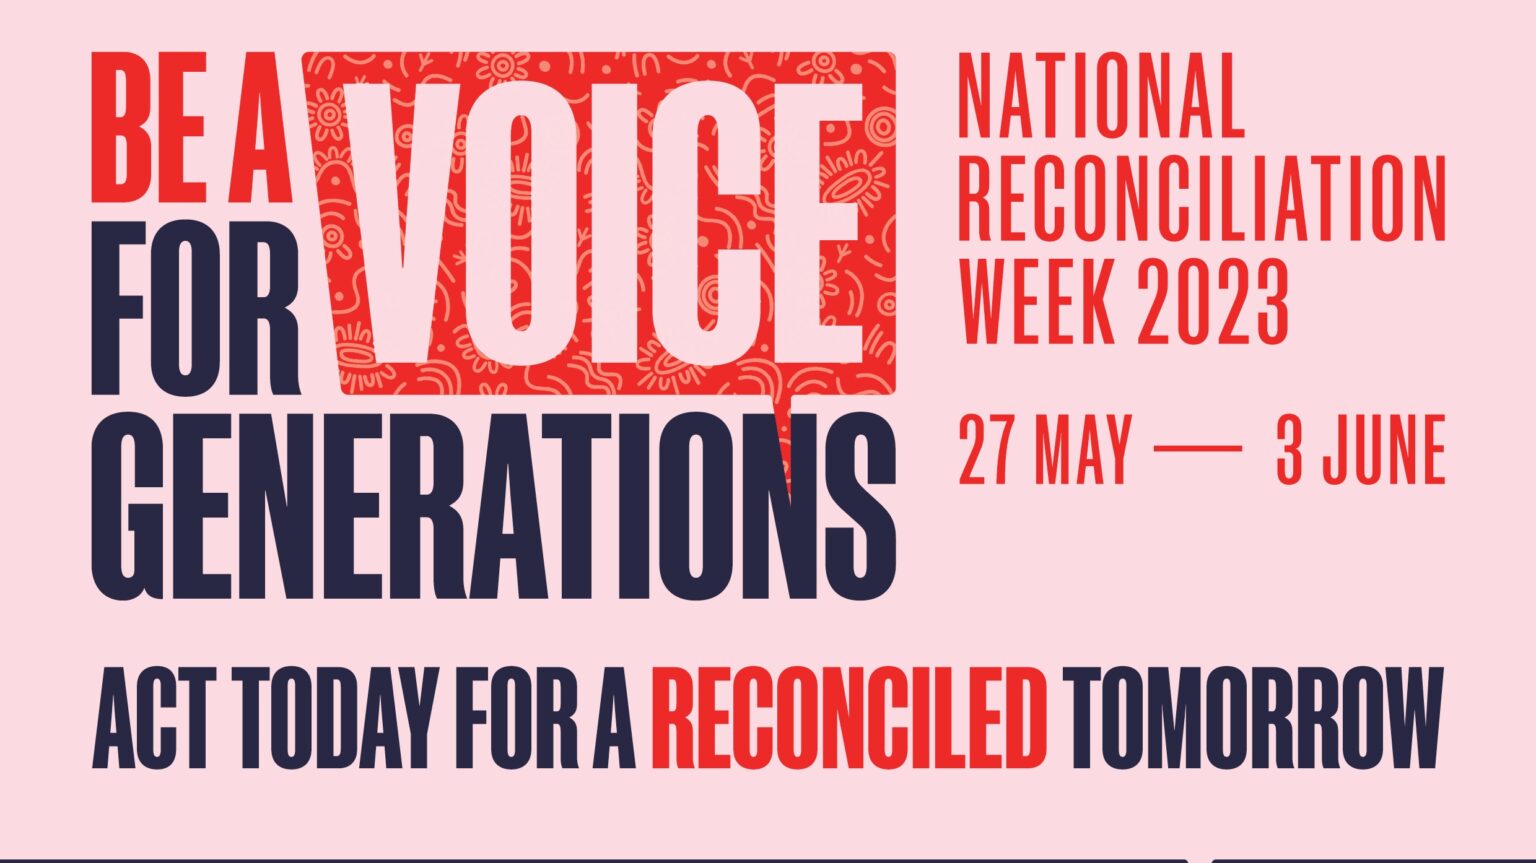 What is National Reconciliation Week?